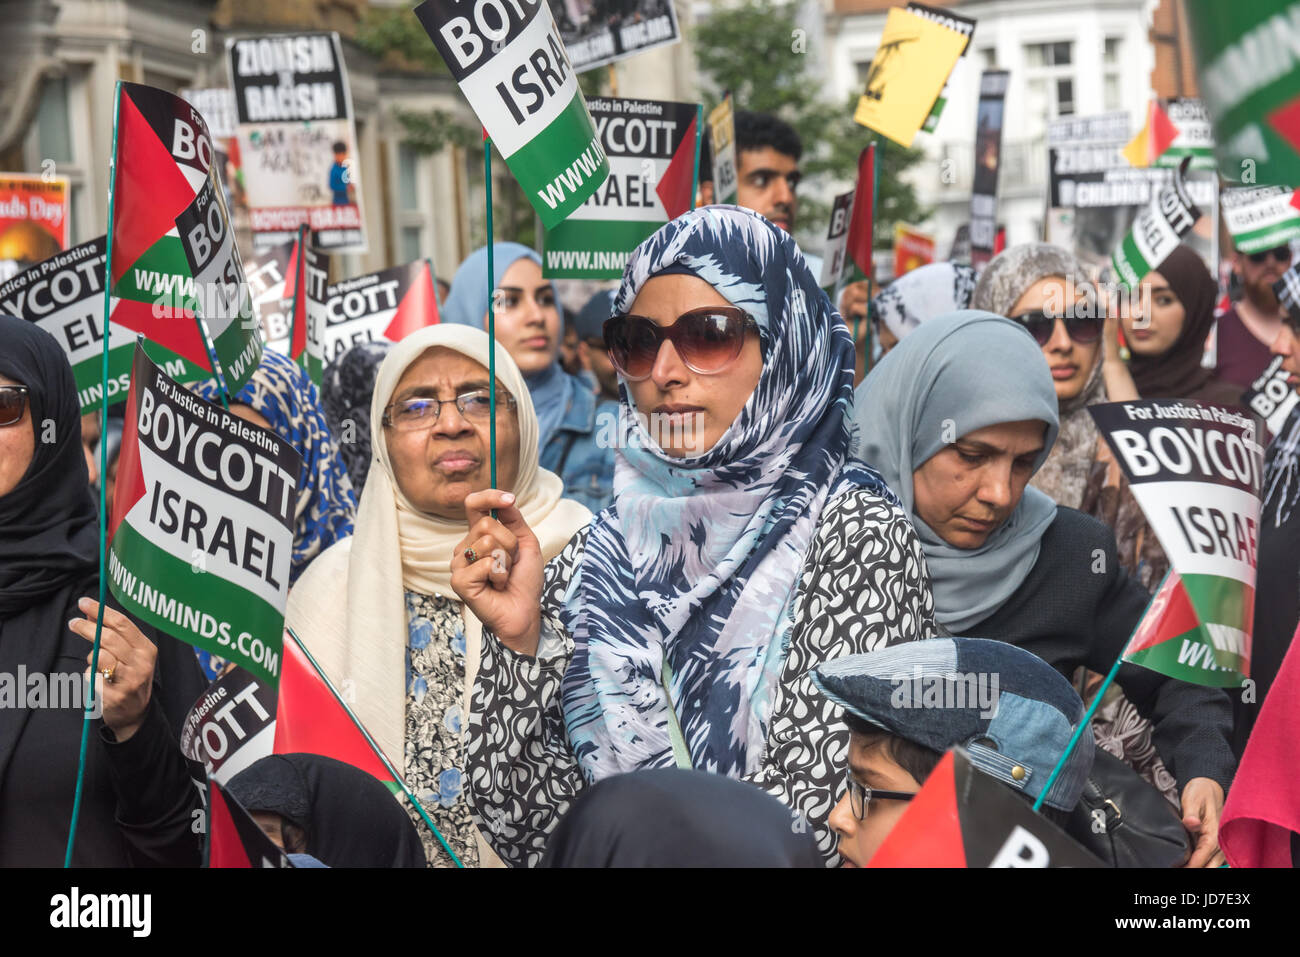 London, UK. 18th June, 2017. London, UK. 18th June 2017. Women on the annual Al Quds (Jerusalem) Day march in London was attended by several thousand from all over the country. Organised by Quds committee with the Islamic Human Rights Commission and supported by various groups including the Stop the War Coalition, Muslim Association of Britain and Jews for Boycotting Israeli Goods was led by Imams and Neturei Karta anti-Zionist Jews, it called for Freedom for Palestine and for all oppressed people's across the world. As usual in attracted opposition from Zionist groups, with a rally being hel Stock Photo